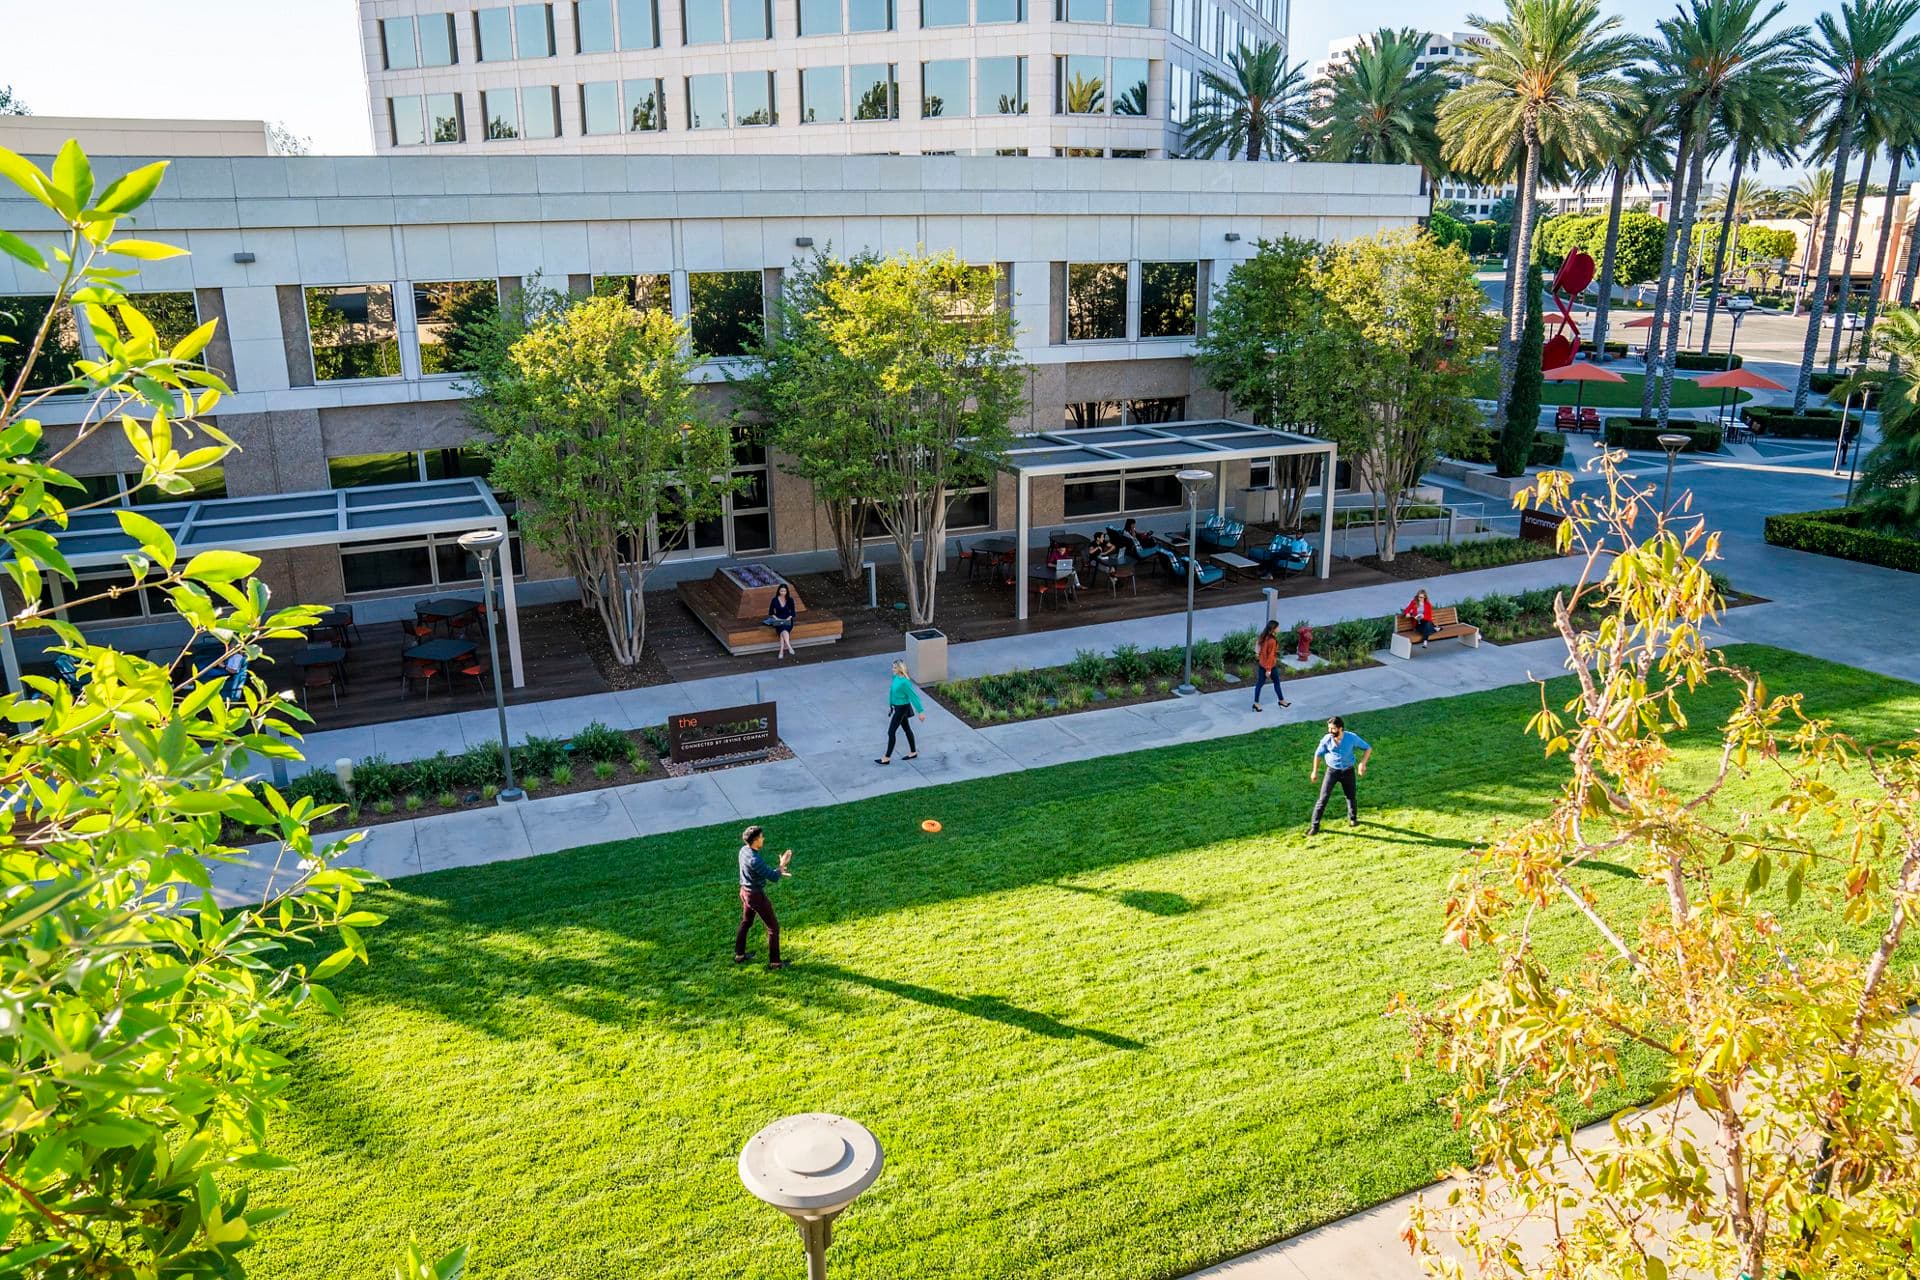 Exterior view of people at The Commons outdoor workspace at the 100 Spectrum Center Drive office building in Irvine, CA.